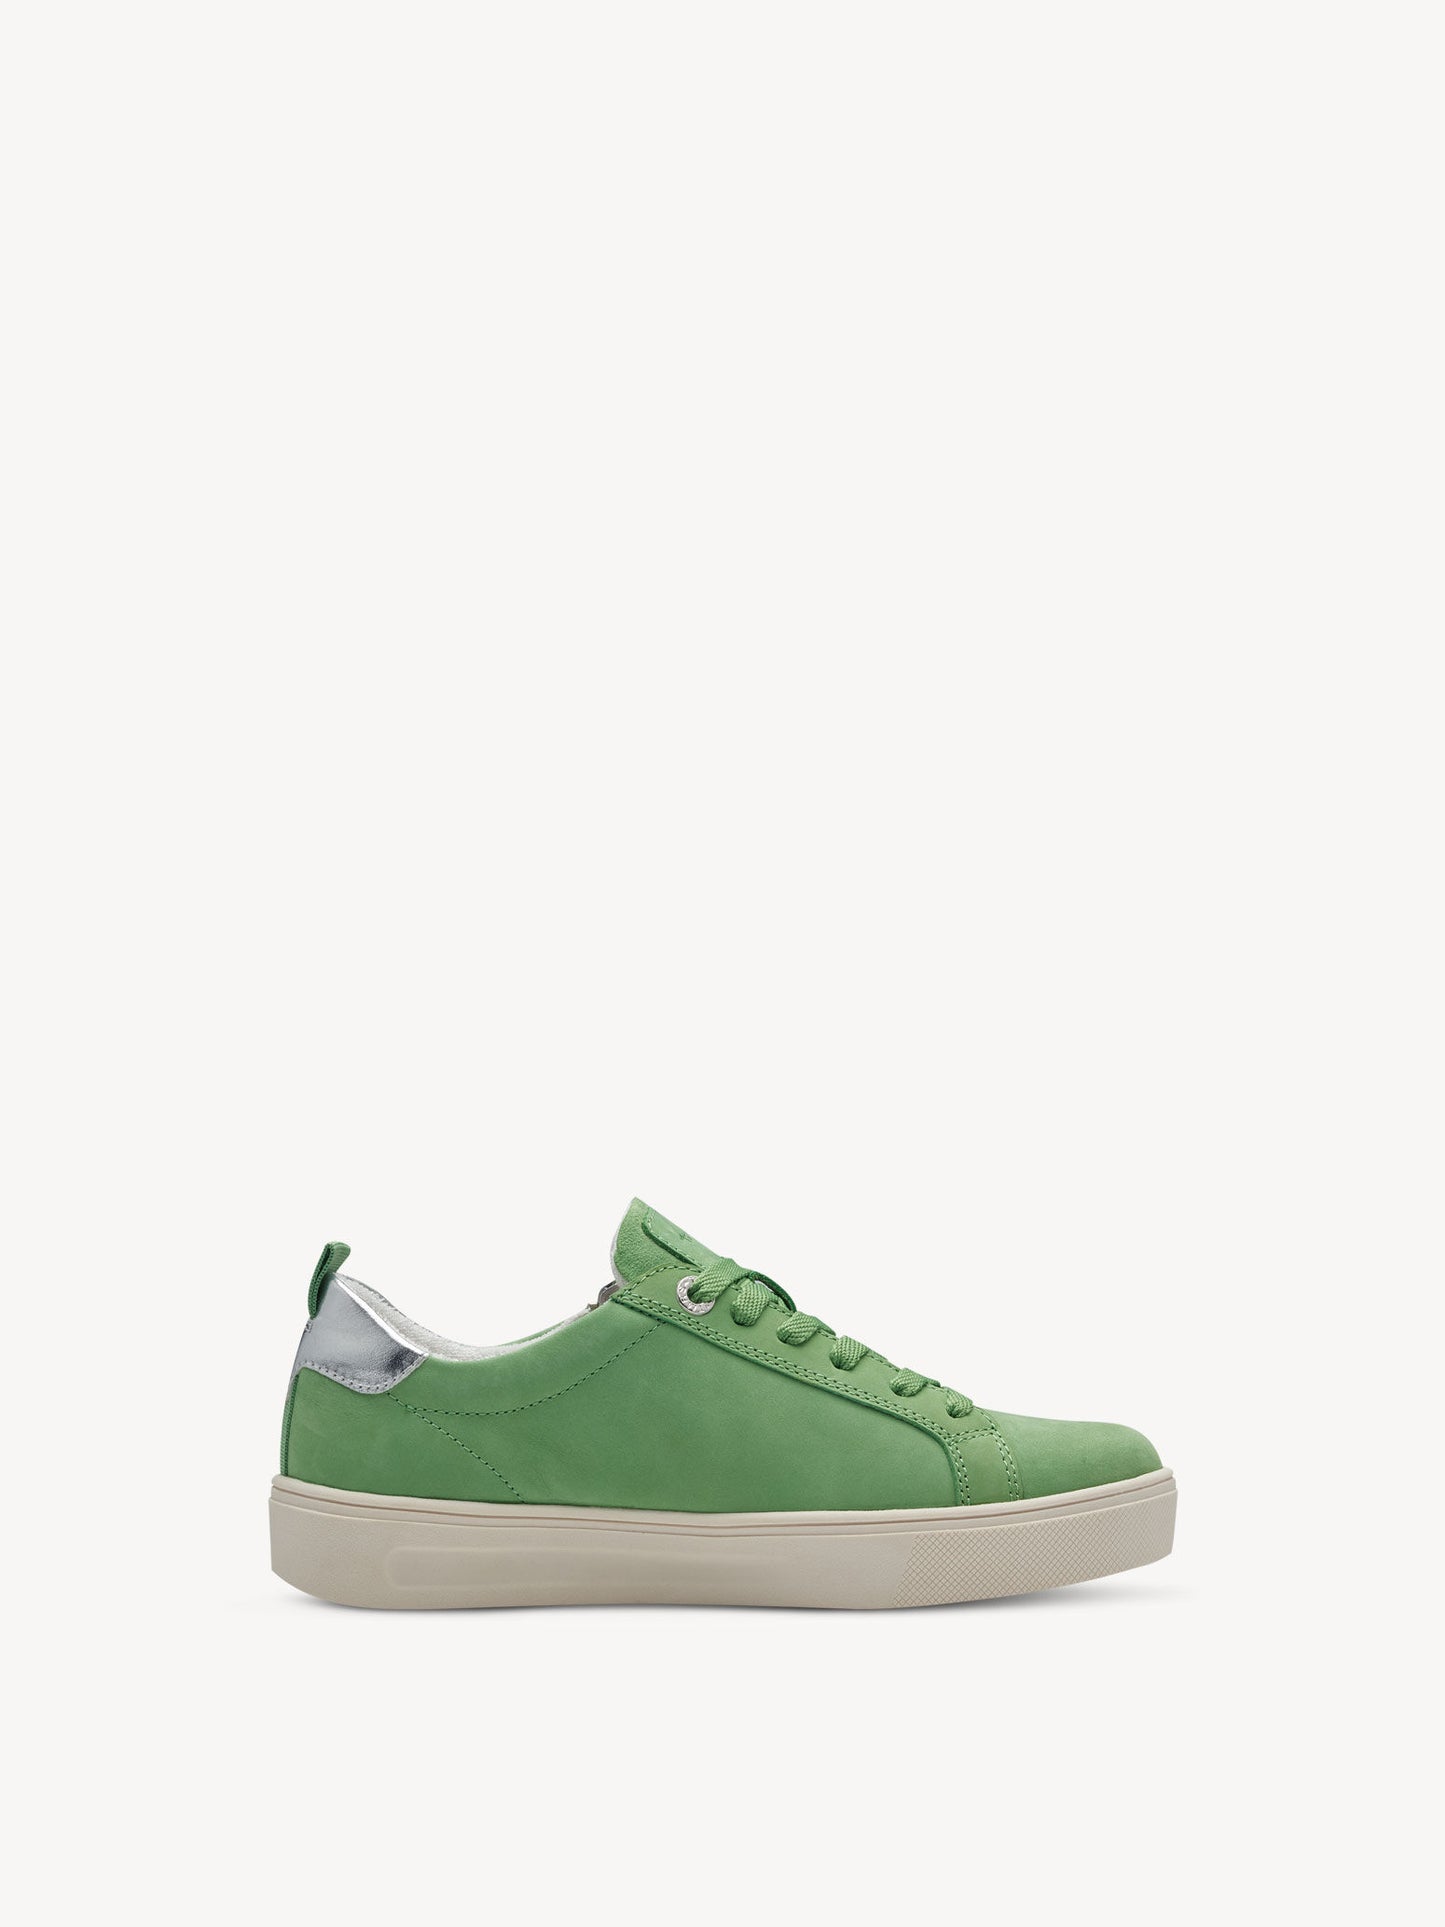 Tamaris Women's 8-83707-42 Leather Lace-Up Sneakers Light Green